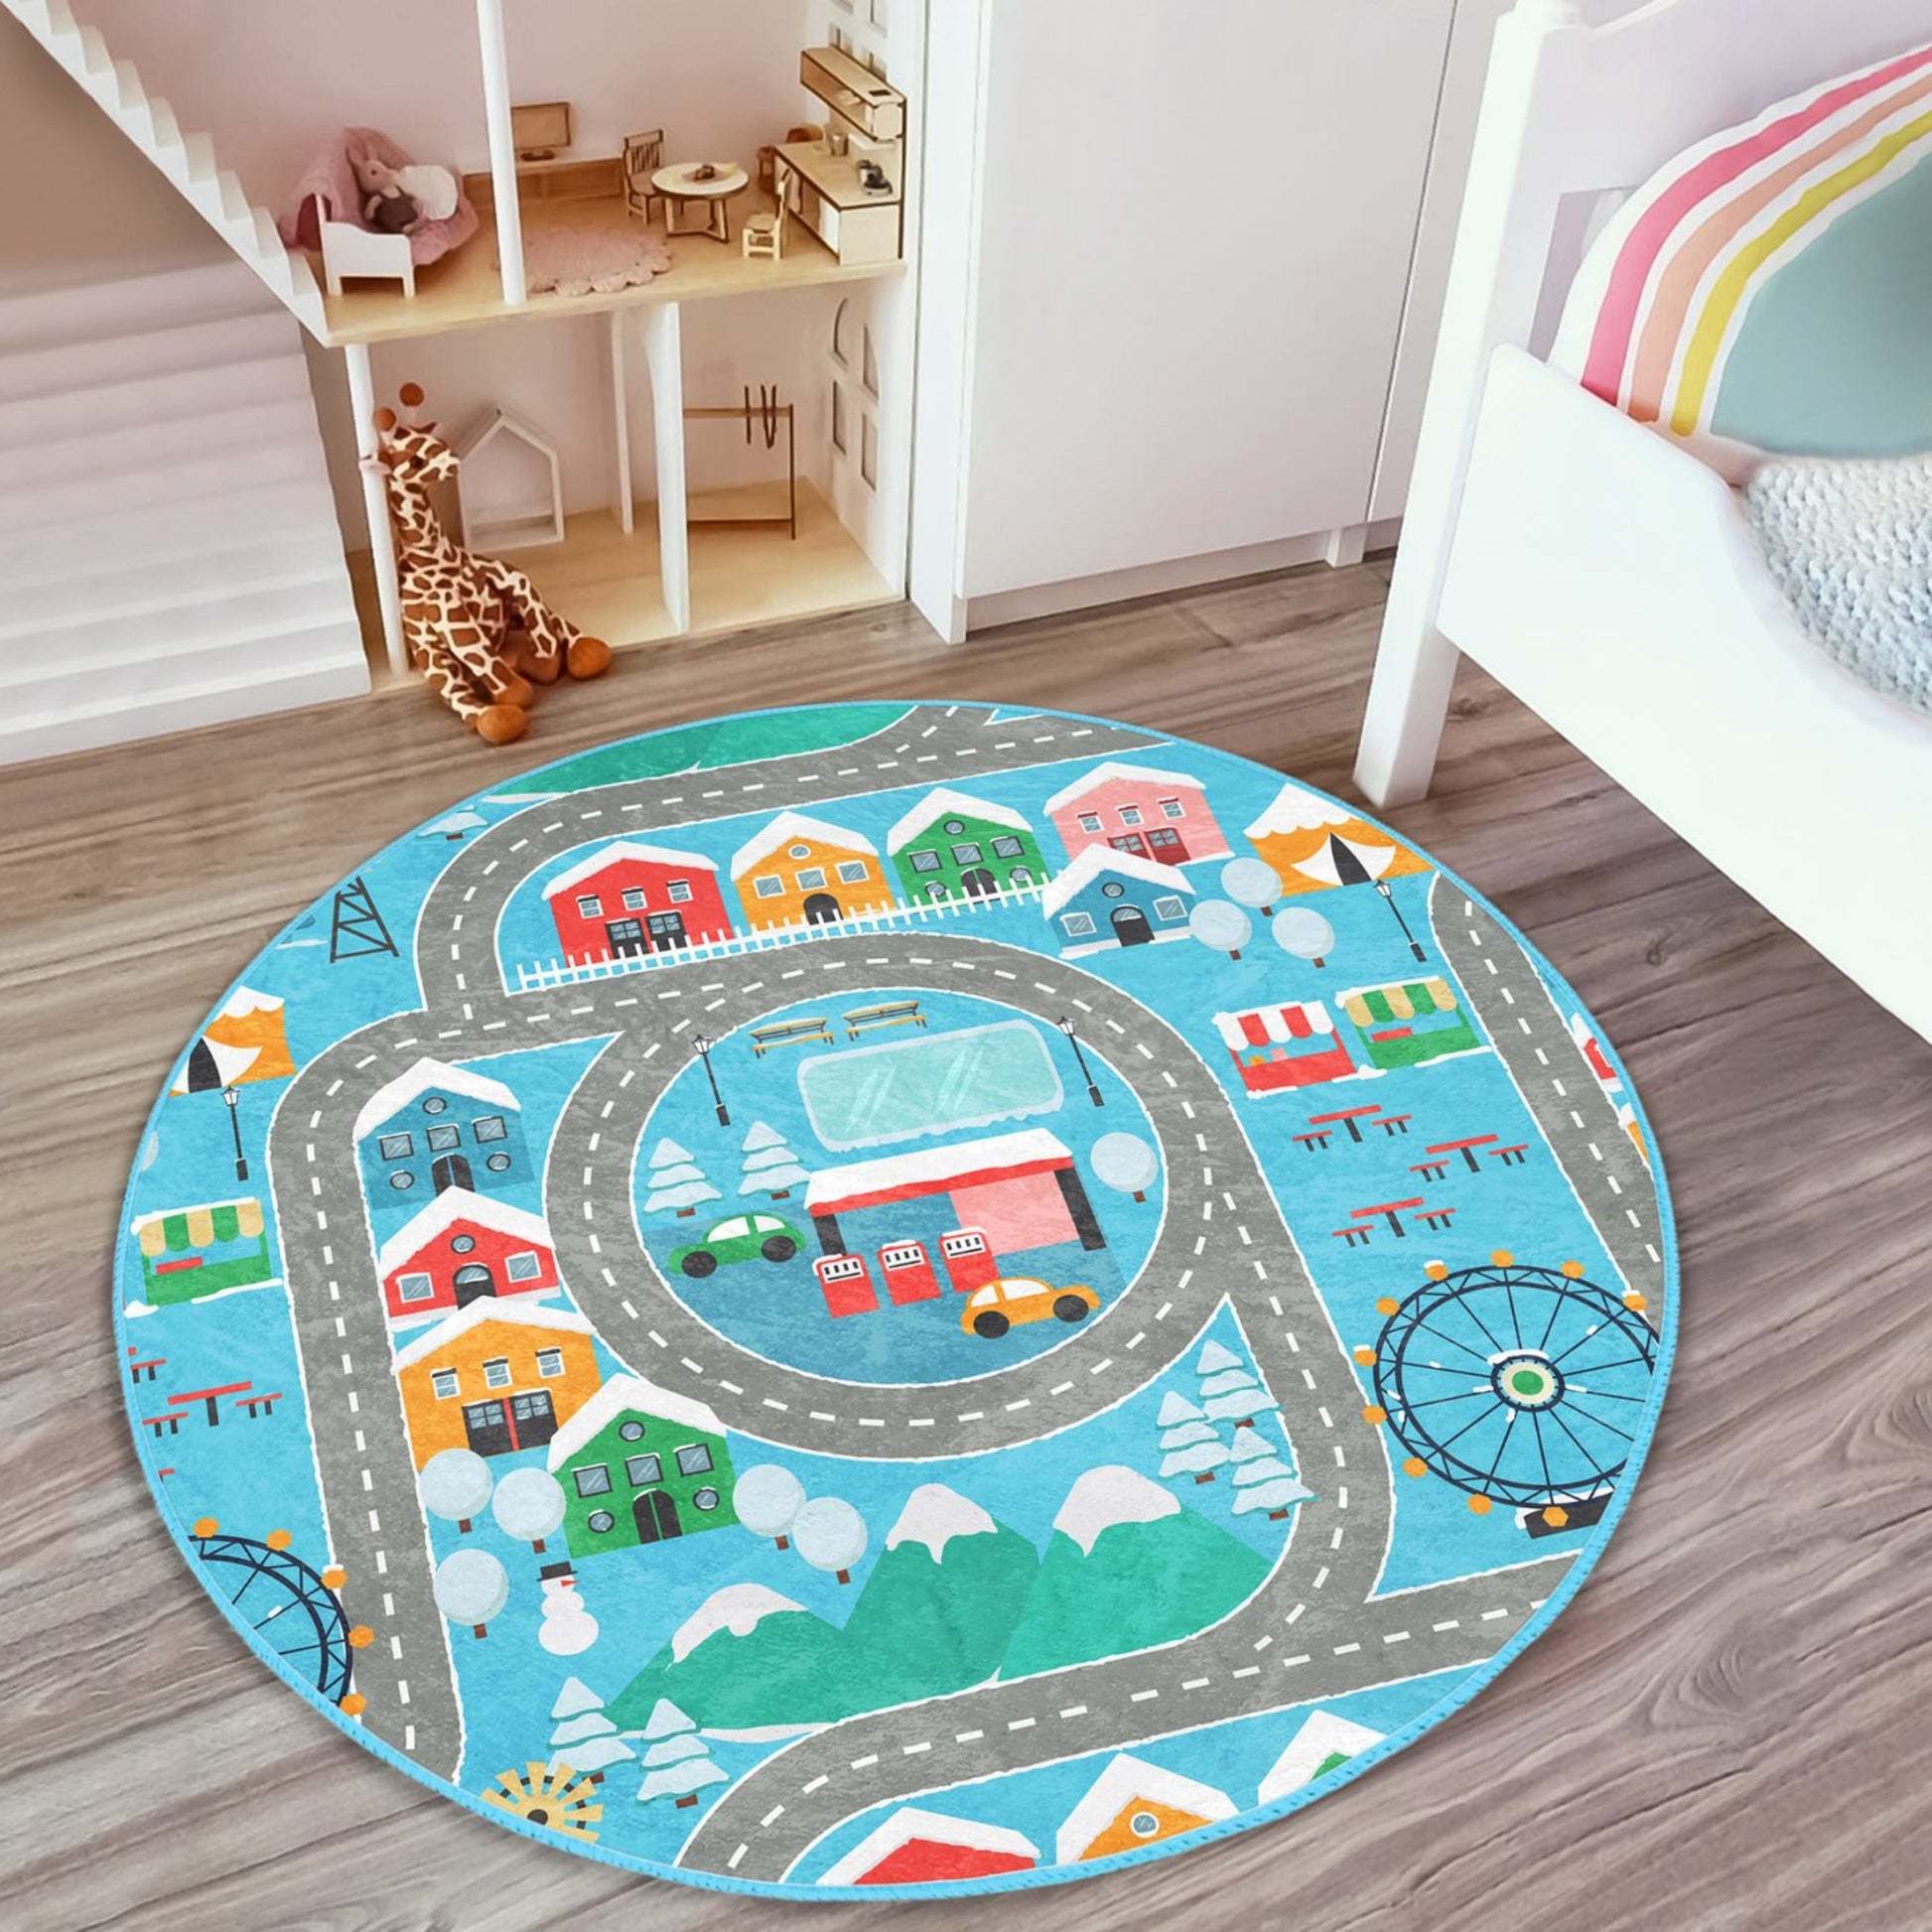 Washable Rug with City Road Print - Easy Maintenance